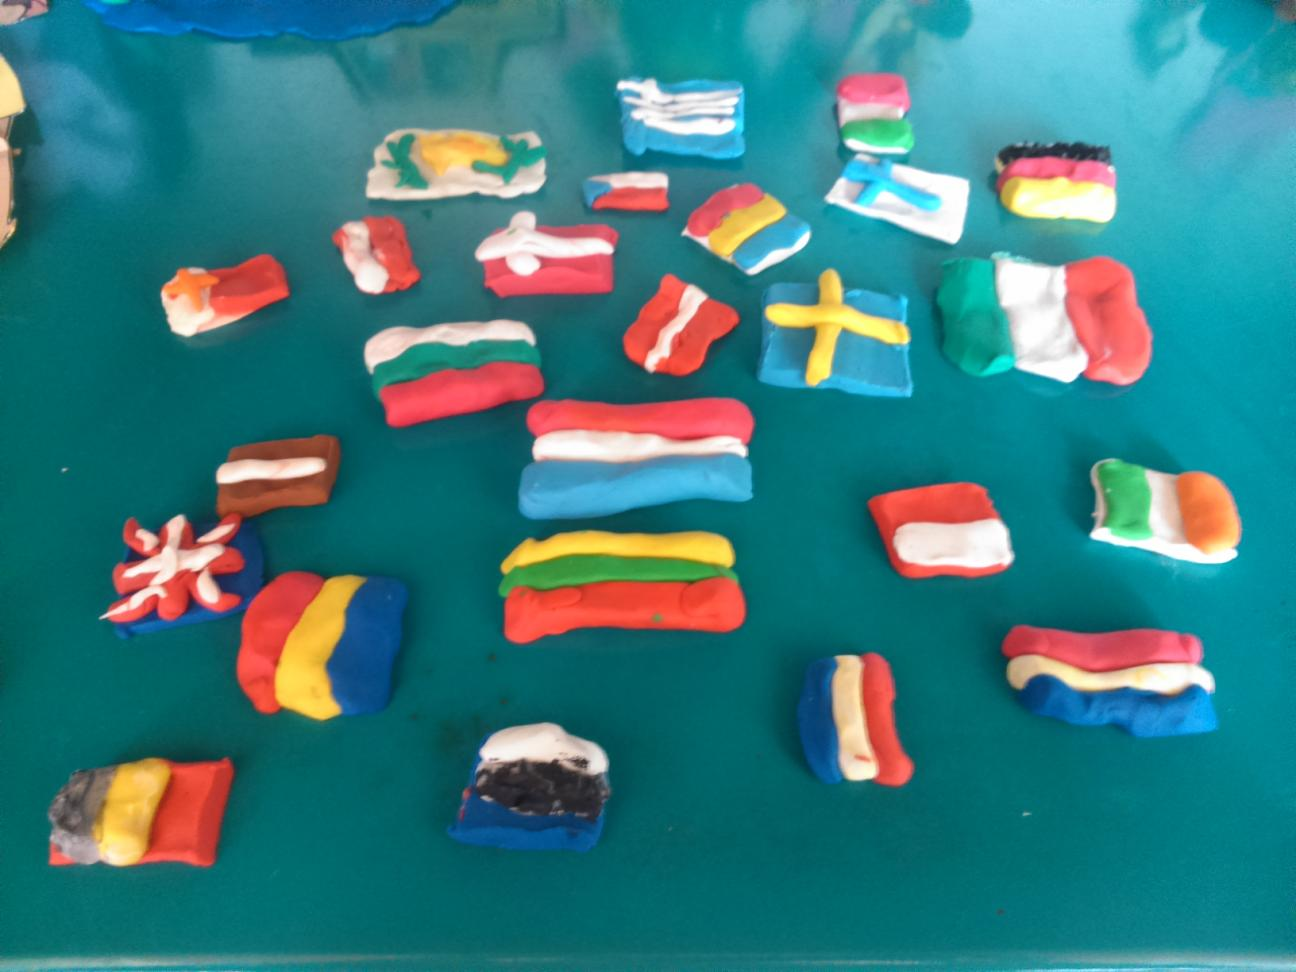 The Flags of E.